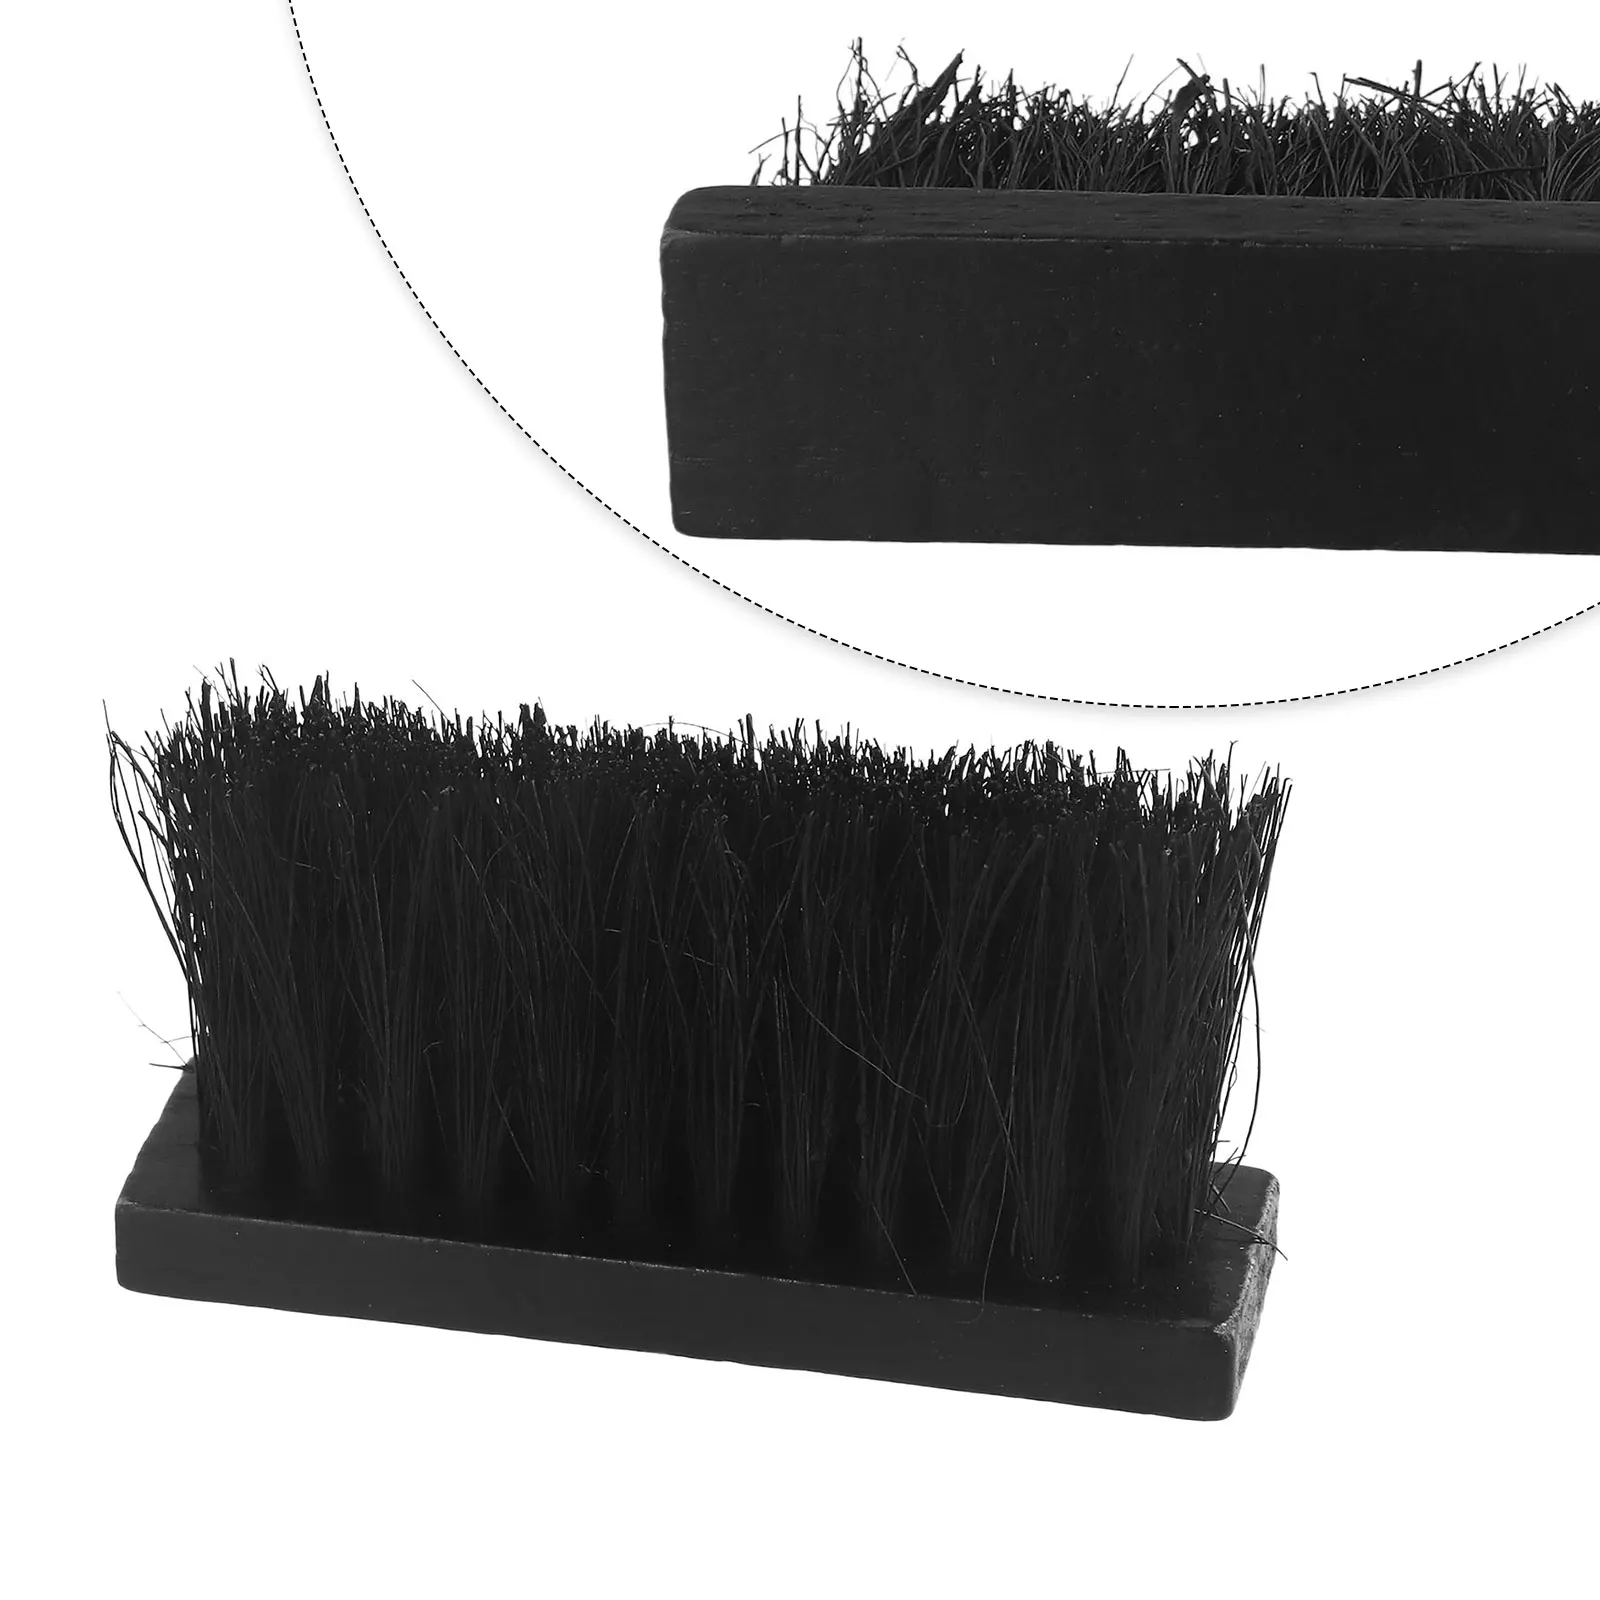 Cleaning Brushes Fireplace Brush 13.5x3.5x1.3cm Black Brush Head Fireplace Fireside Refill Cleaning Square Home Brand New